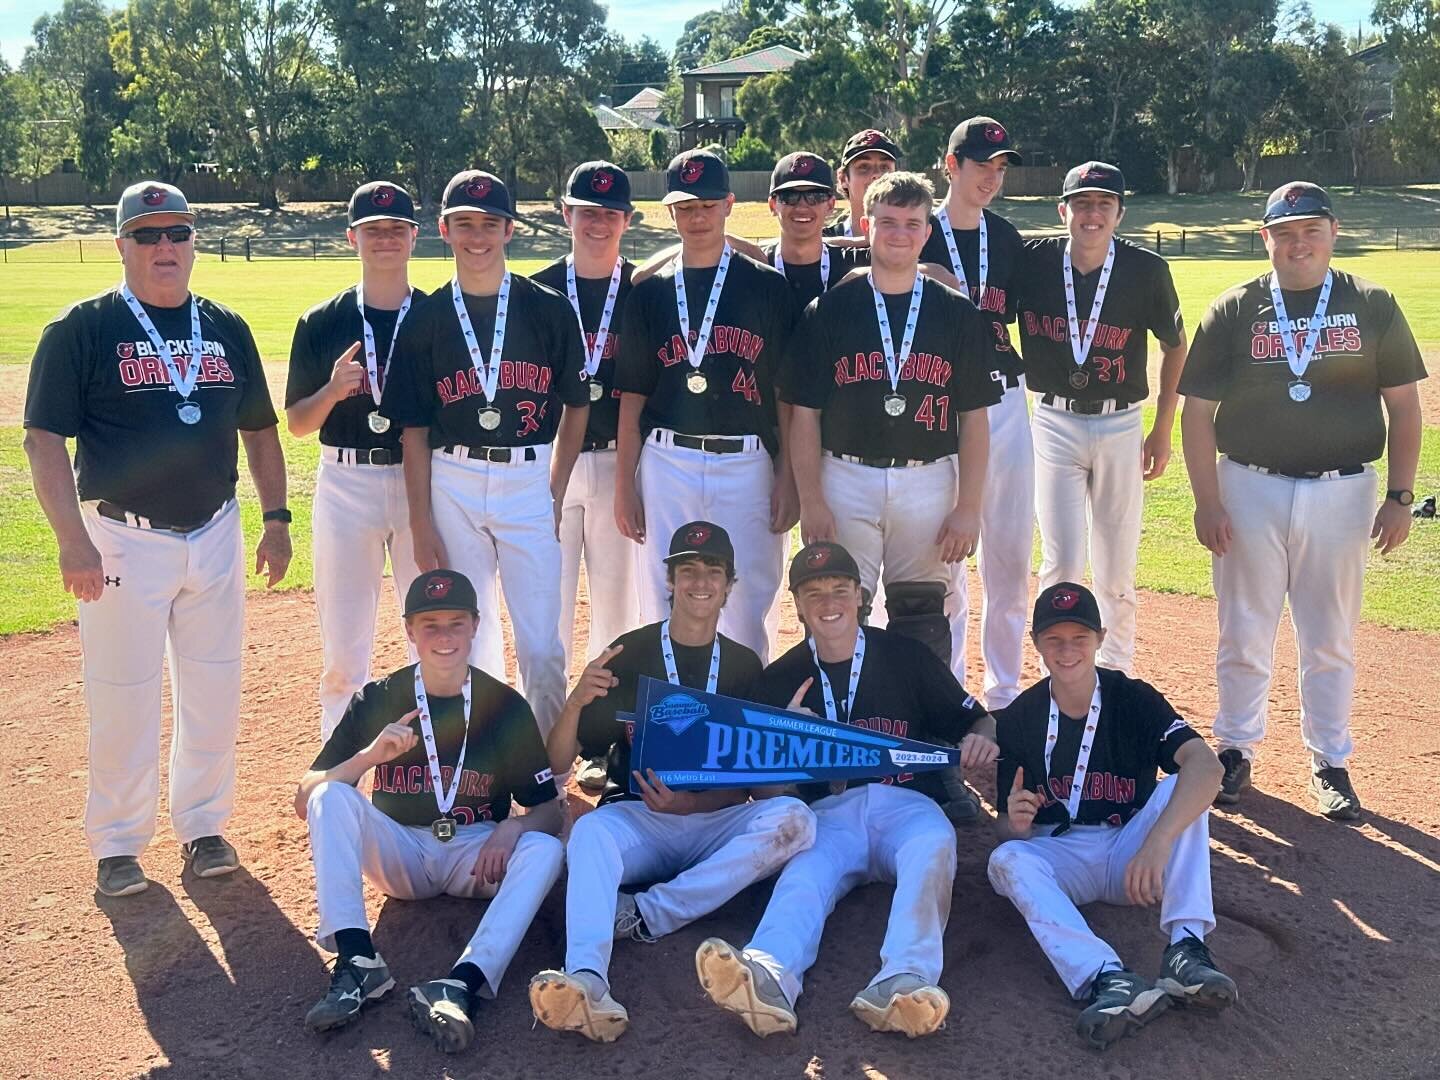 ❤️🖤WINNERS ❤️🖤

Still awaiting more images and details but the u12 have won 11-6 and the u16 have won &ldquo;up a lot to 5&rdquo;

Huge congrats gang. Burner pride.
@baseballvictoria